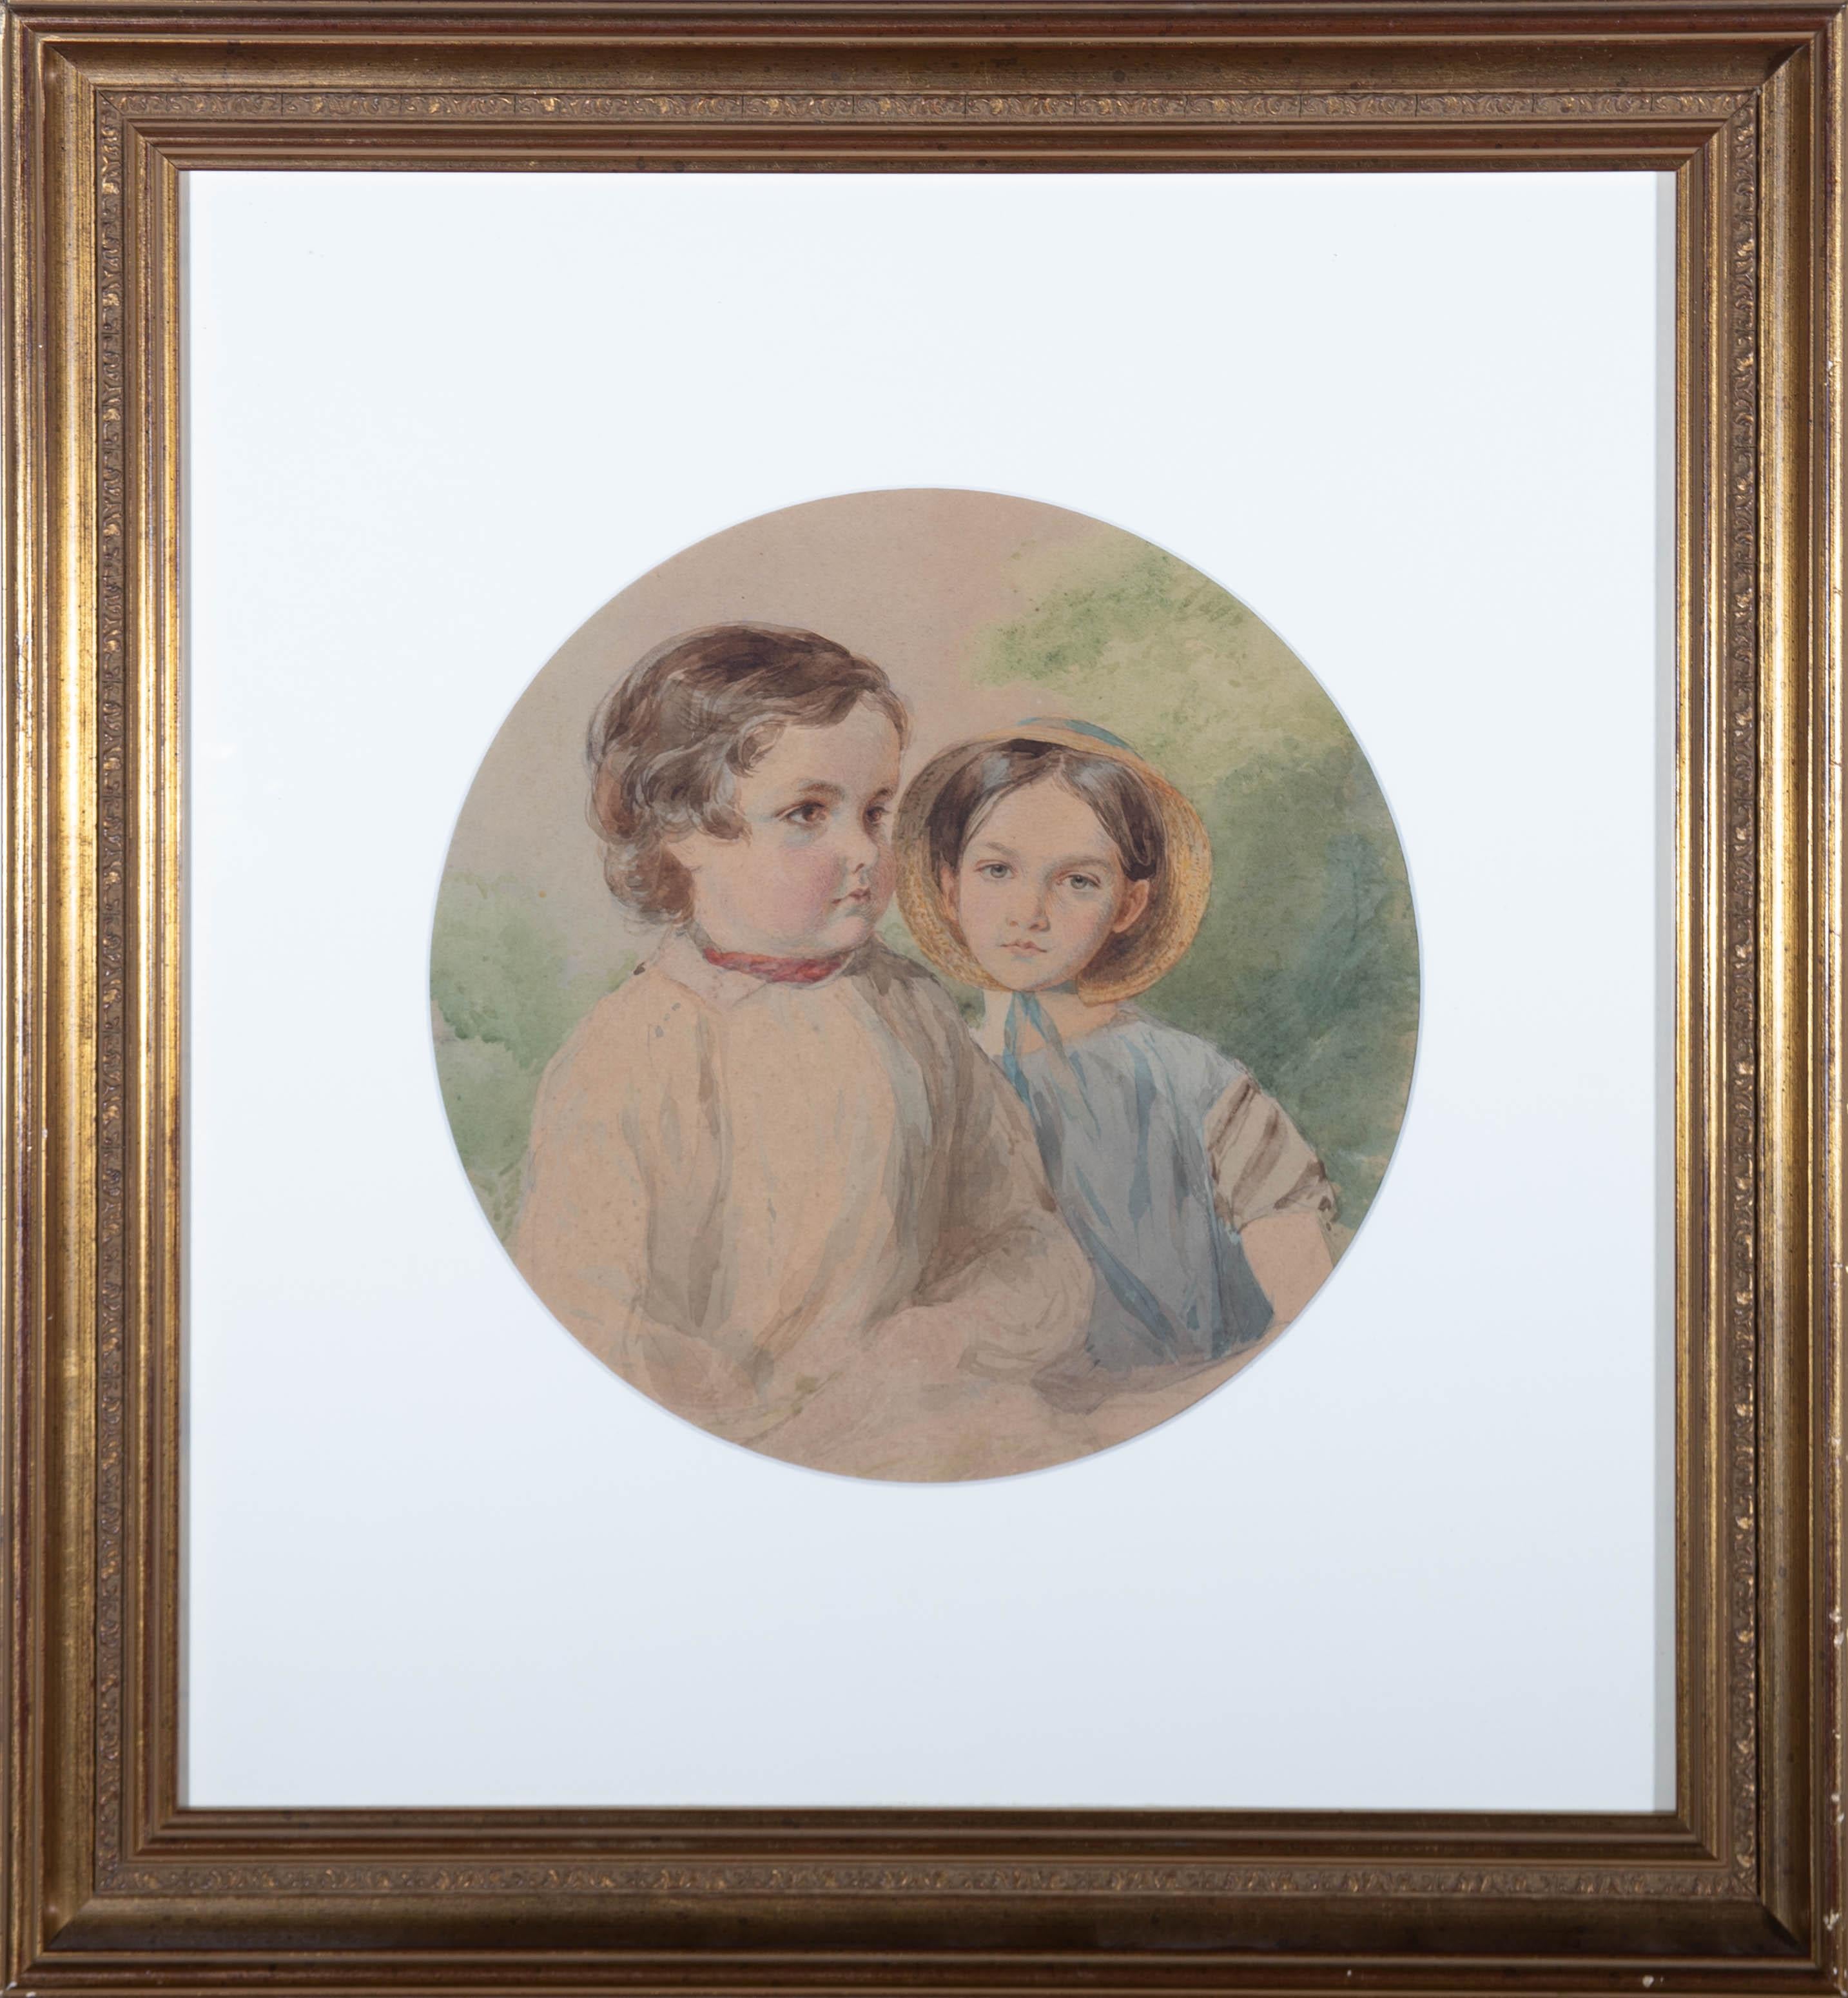 A beautifully delicate Victorian portrait of two siblings. Information to the reverse of the frame indicates the possibility that the children are John and Rose Herschel, the children of the astronomer, John Herschel (1792 -1871). The information